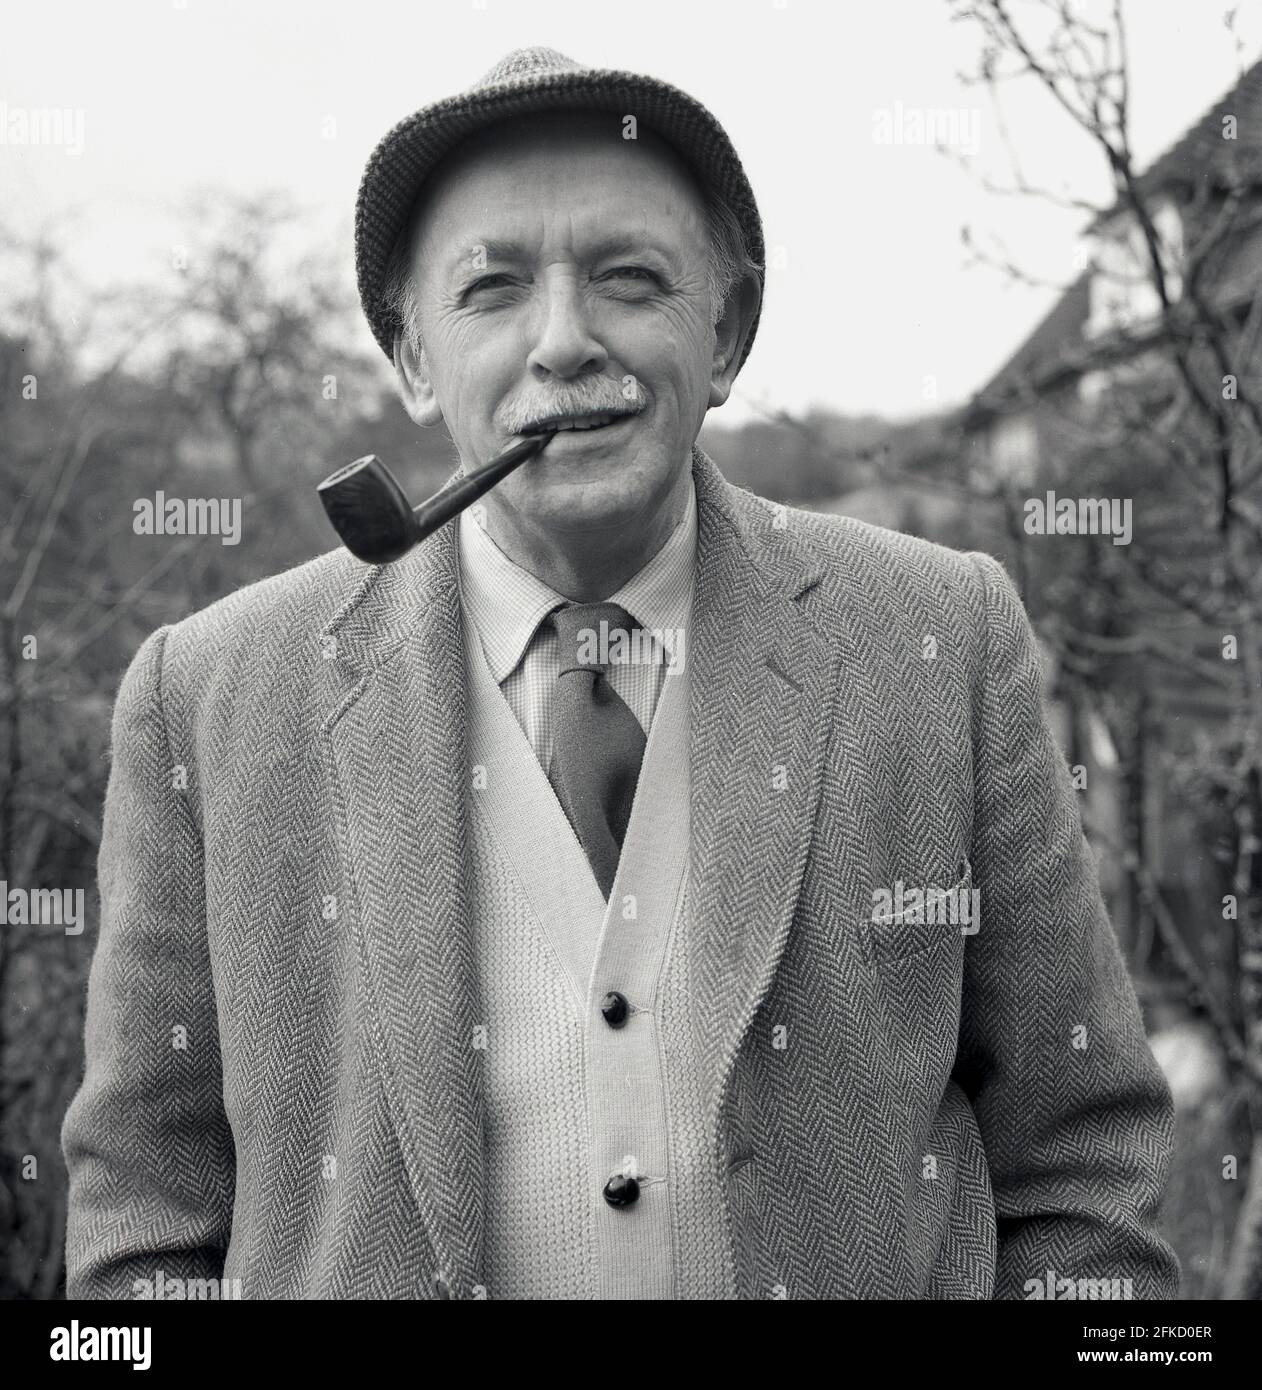 1950s, a portrait of Brian Vesey-Fitzgerald, a naturalist and writer of books on nature, birds and dogs. Also editor of The Field magazine, he was a descendant of the Vesty-Fitzgeralds, a famous Ango-Irish family whose members became MPs in both British and Irish governments. Born in 1905 in Wrexham, Denbighshire, Wales, as Brian Percy Seymour Vesey Fitzgerald, like many of his generation, he loved his tobacco and is seen here with his pipe and wearing traditonal country clothing of a tweed jacket and tie with a cardigan and hat. He was an authority on the history of Gypsies in Britain. Stock Photo